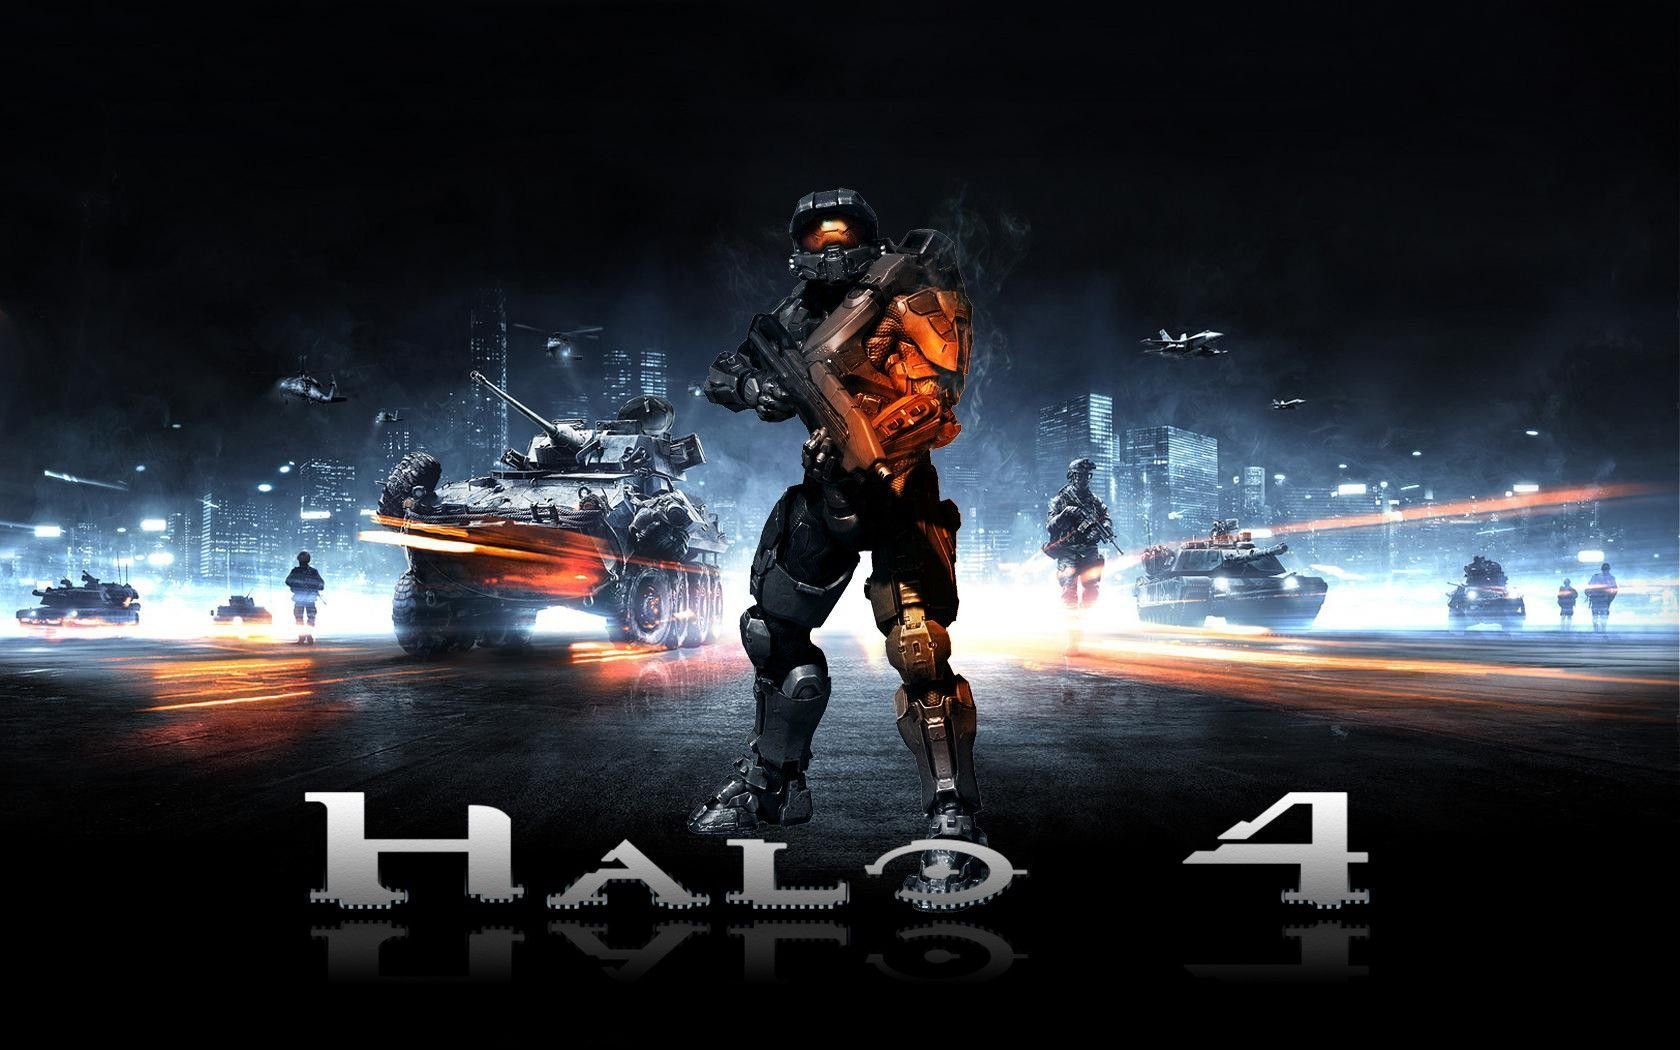 halo, Shooter, Fps, Action, Fighting, Warrior, Sci fi, Futuristic, Armor, Cyborg, Robot, Poster, Battlefield Wallpaper